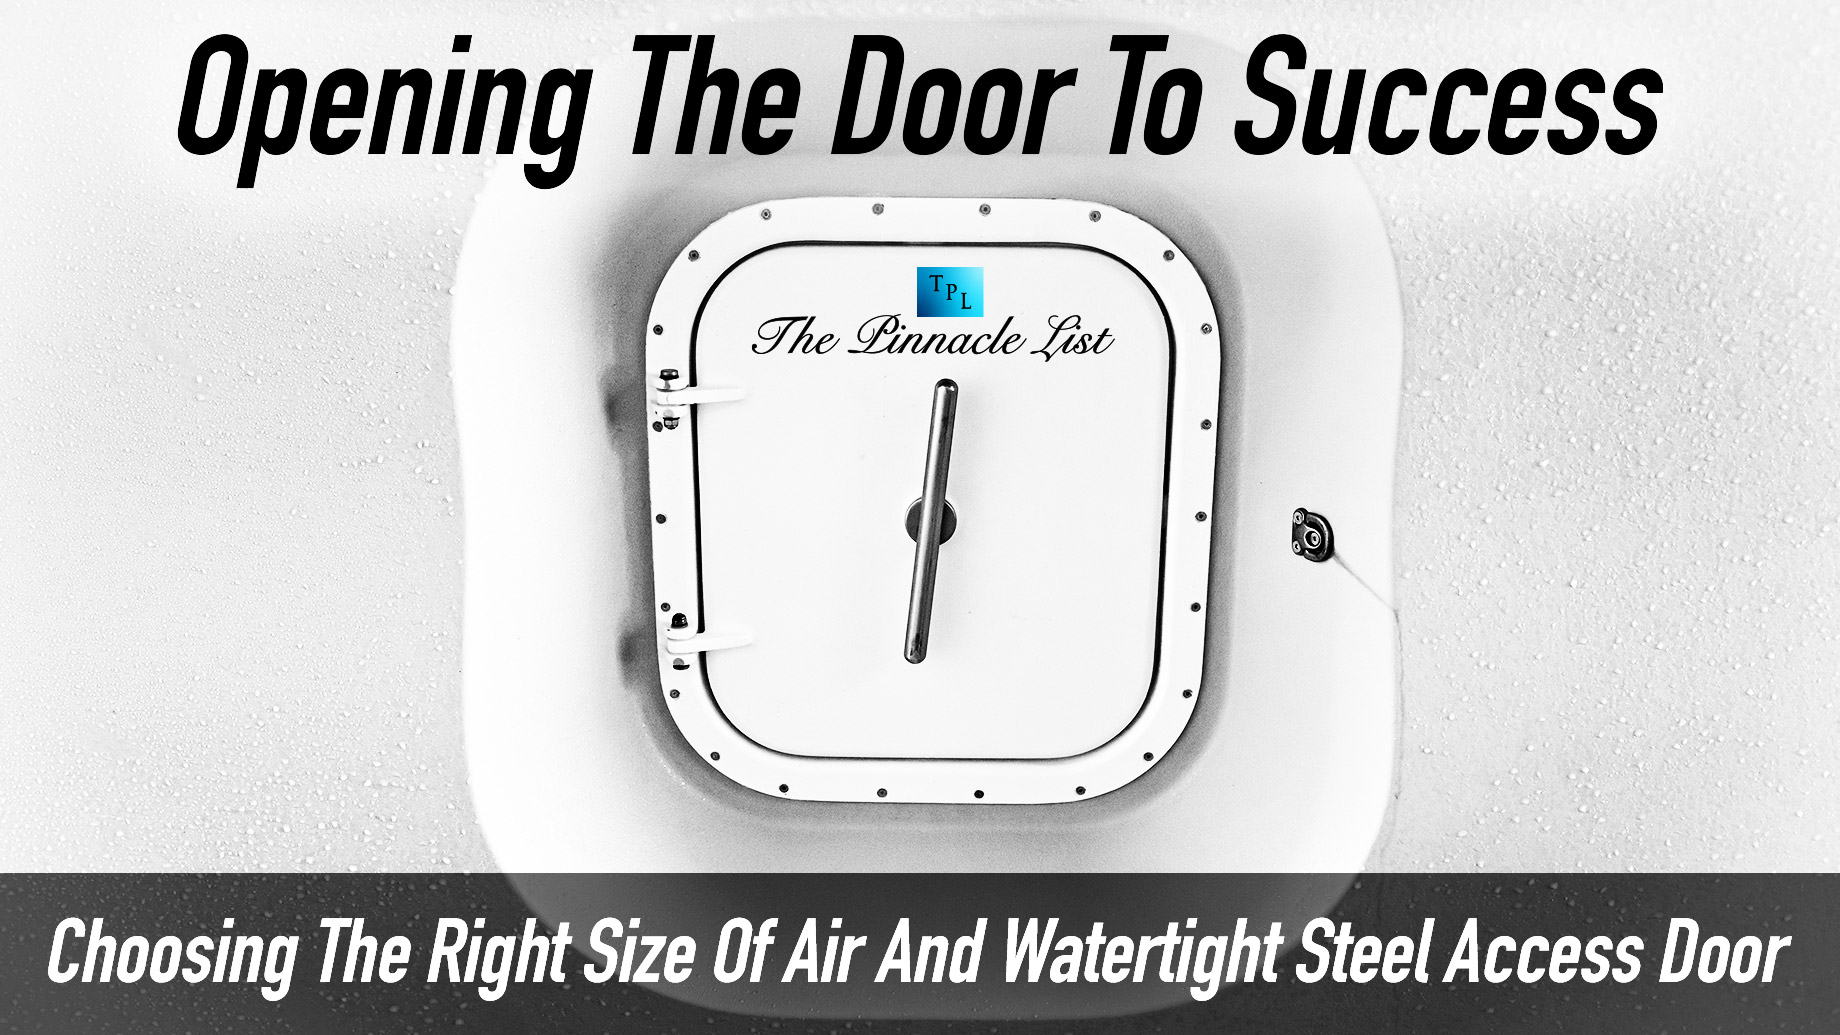 Opening The Door To Success: Choosing The Right Size Of Air And Watertight Steel Access Door